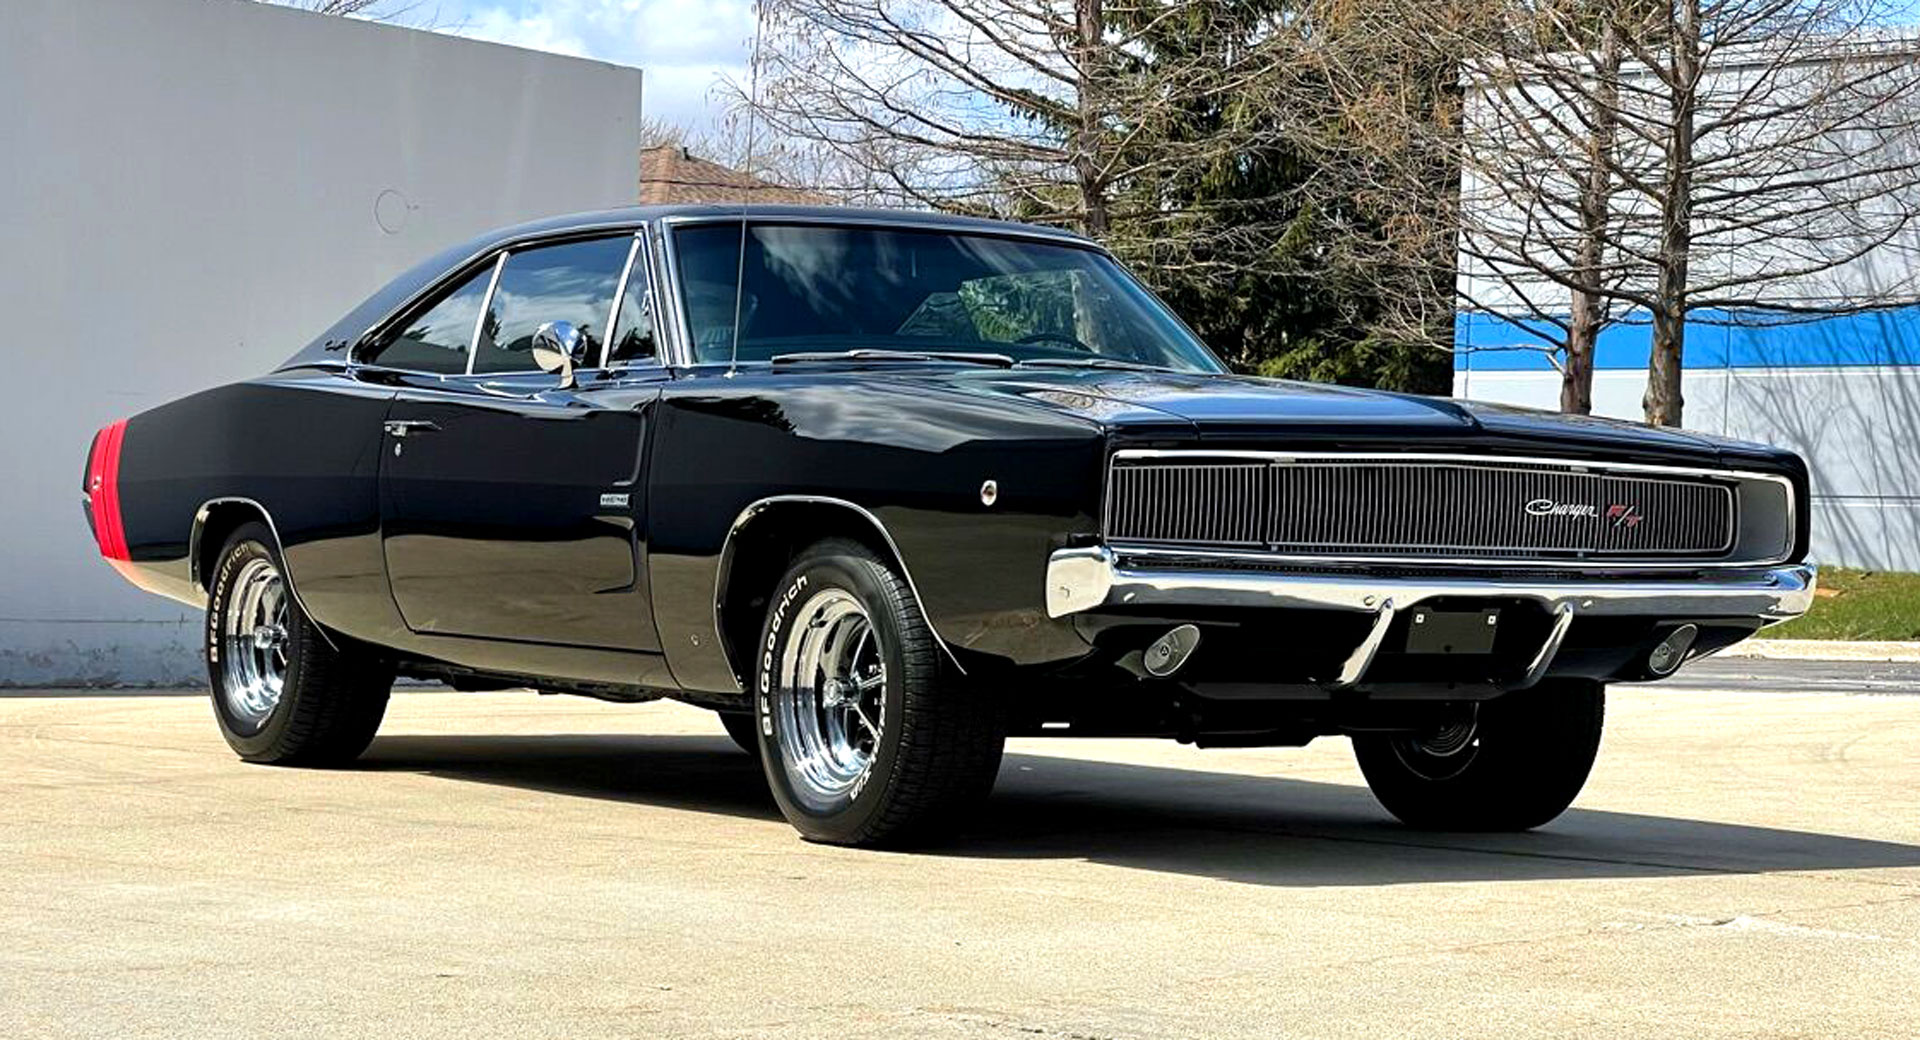 Most-searched cruiser: '69 Dodge Charger